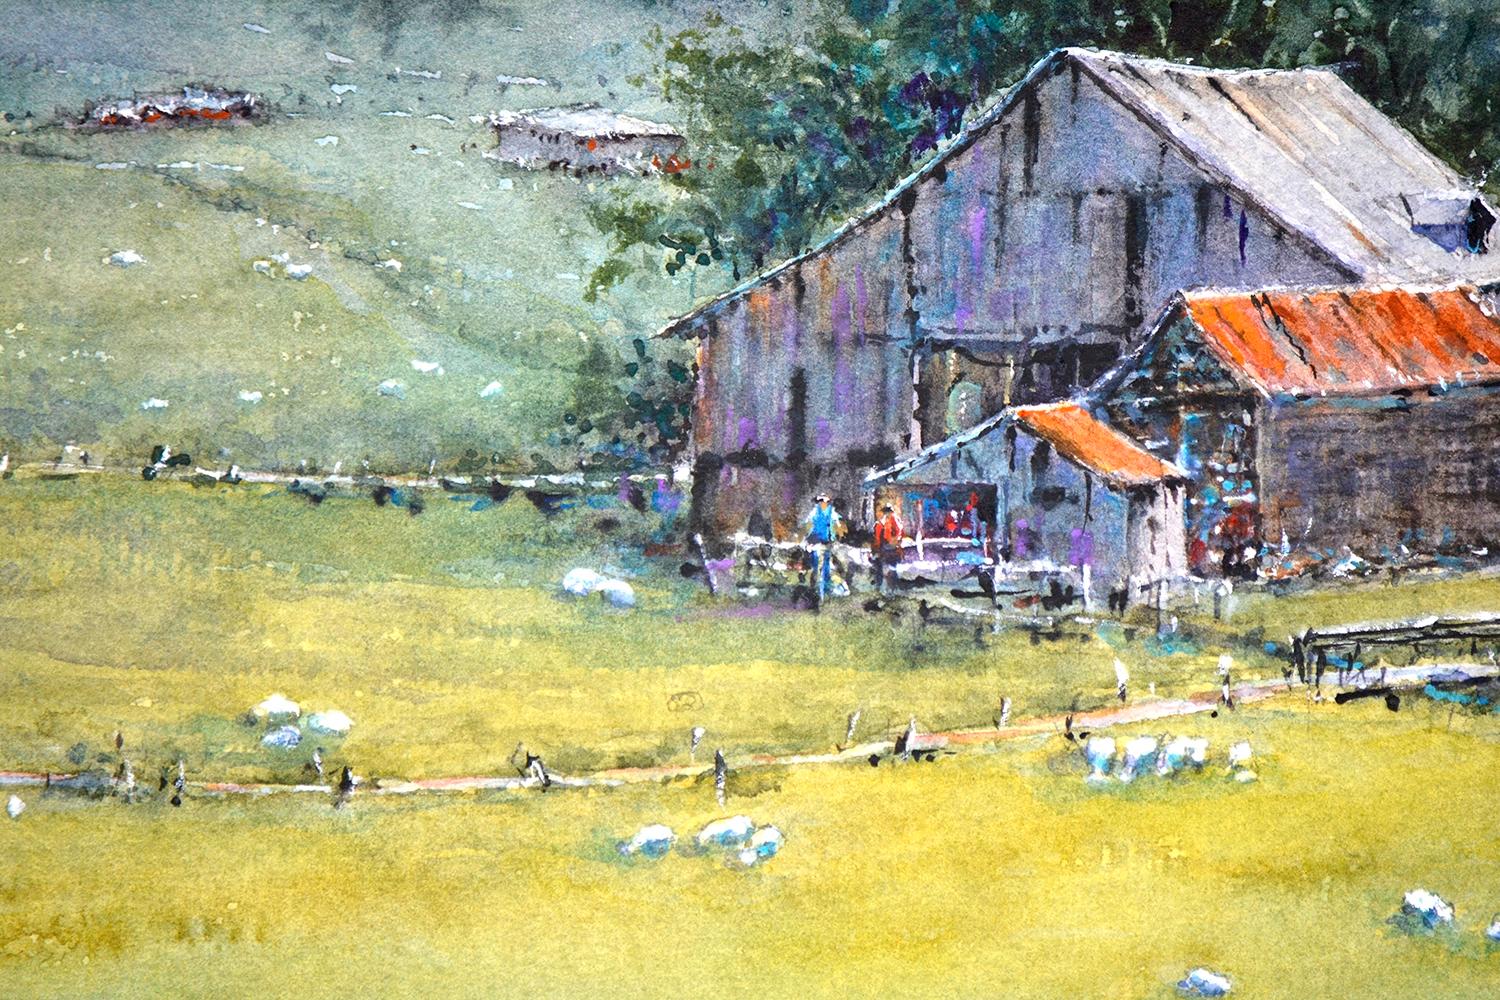 <p>Artist Comments<br>A vibrant landscape painting portrays life in the countryside. Sheep graze peacefully as spring arrives, while people gather around a barn to go about their routines. Artist Judy Mudd captures the scene to pay tribute to